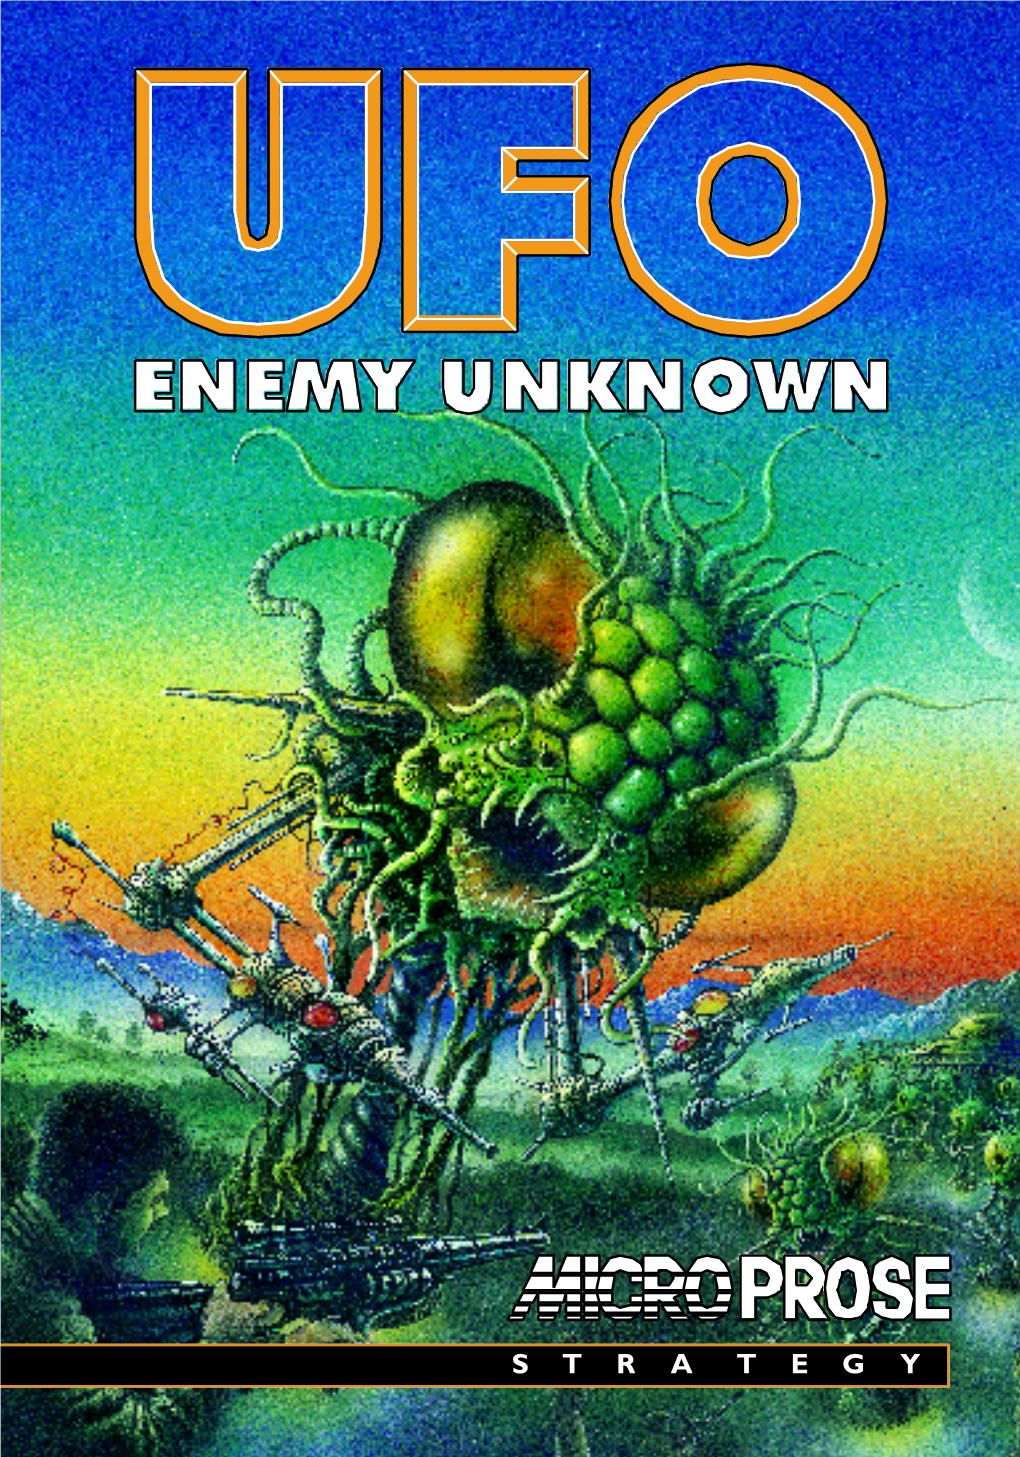 UFO Enemy Unknown Package Should Contain a Player’S Handbook, This Technical Supplement, a Set of 3.5” High Density Disks and a Registration Card